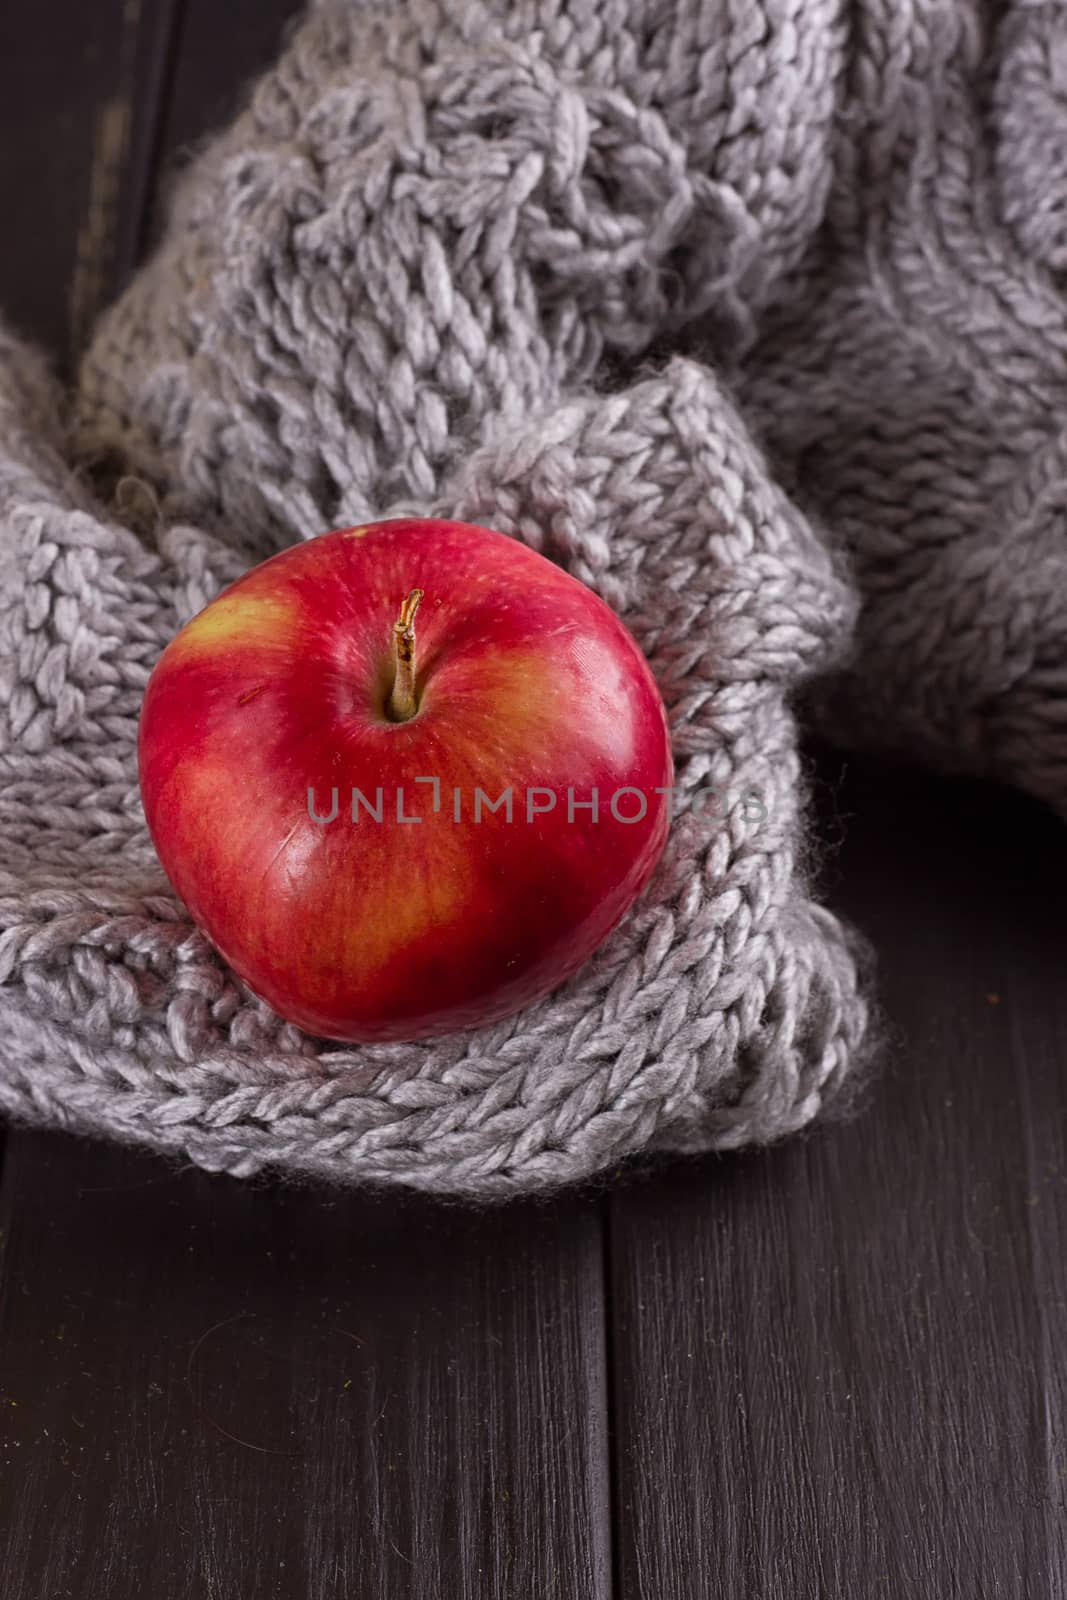 Red apple in a knitted gray sweater